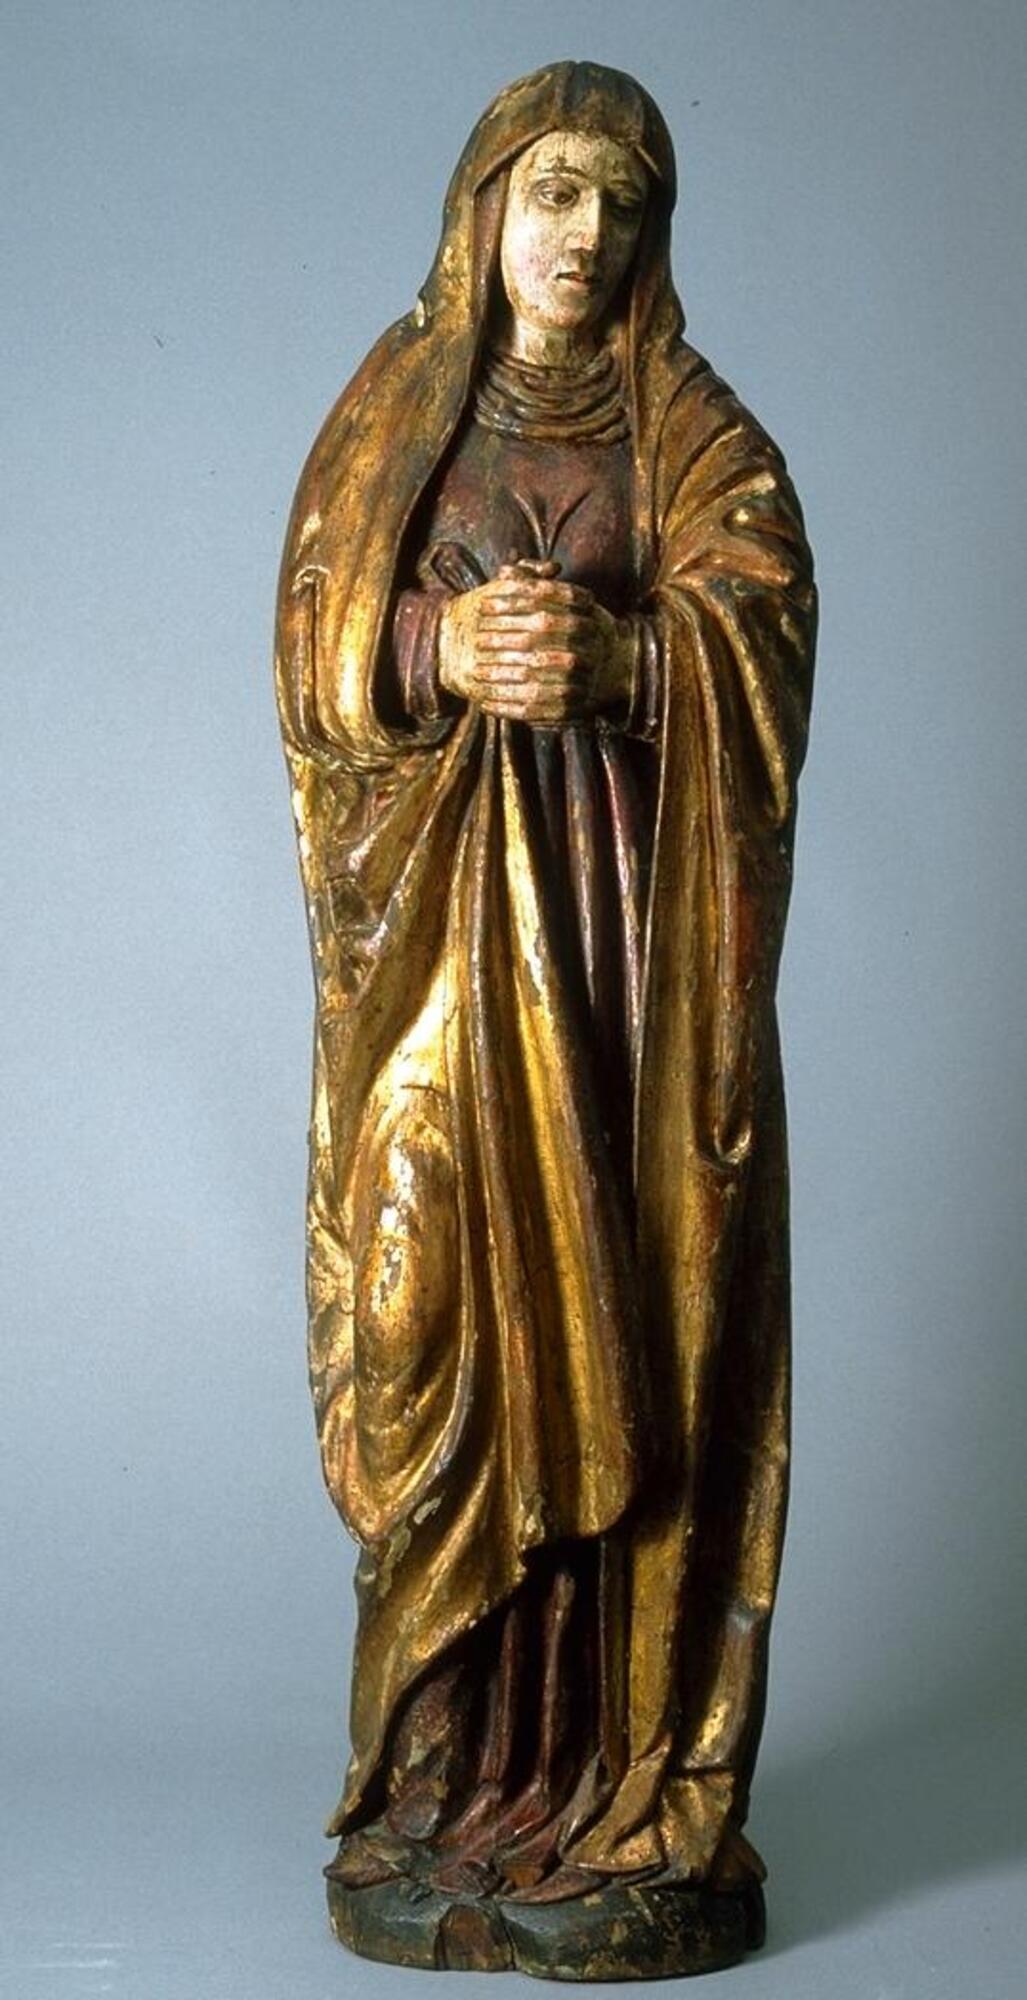 This standing figure of the Virgin turns slightly toward the left with her head bowed and hands clasped before her in a restrained expression of grief. Her robe is gilded, which contributes a regal note to this somber figure.